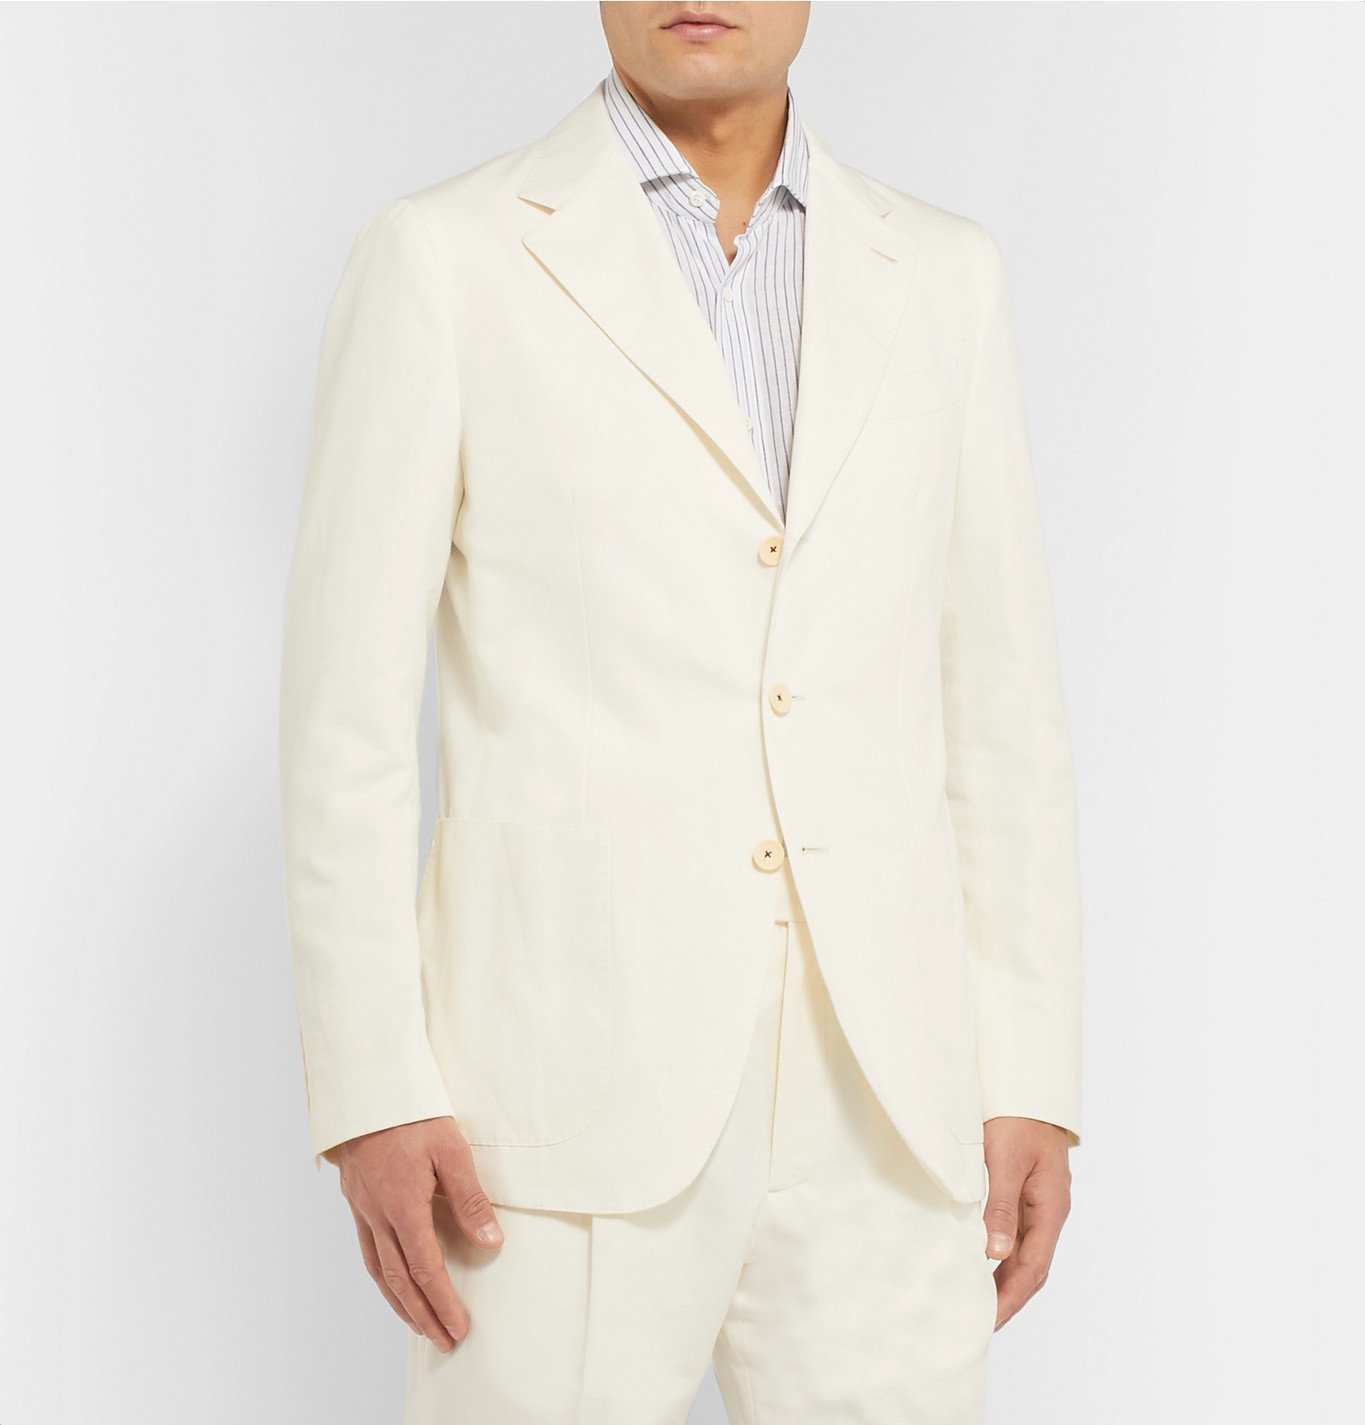 CARUSO REDA/A 3B BUTTERFLY SUIT - セットアップ